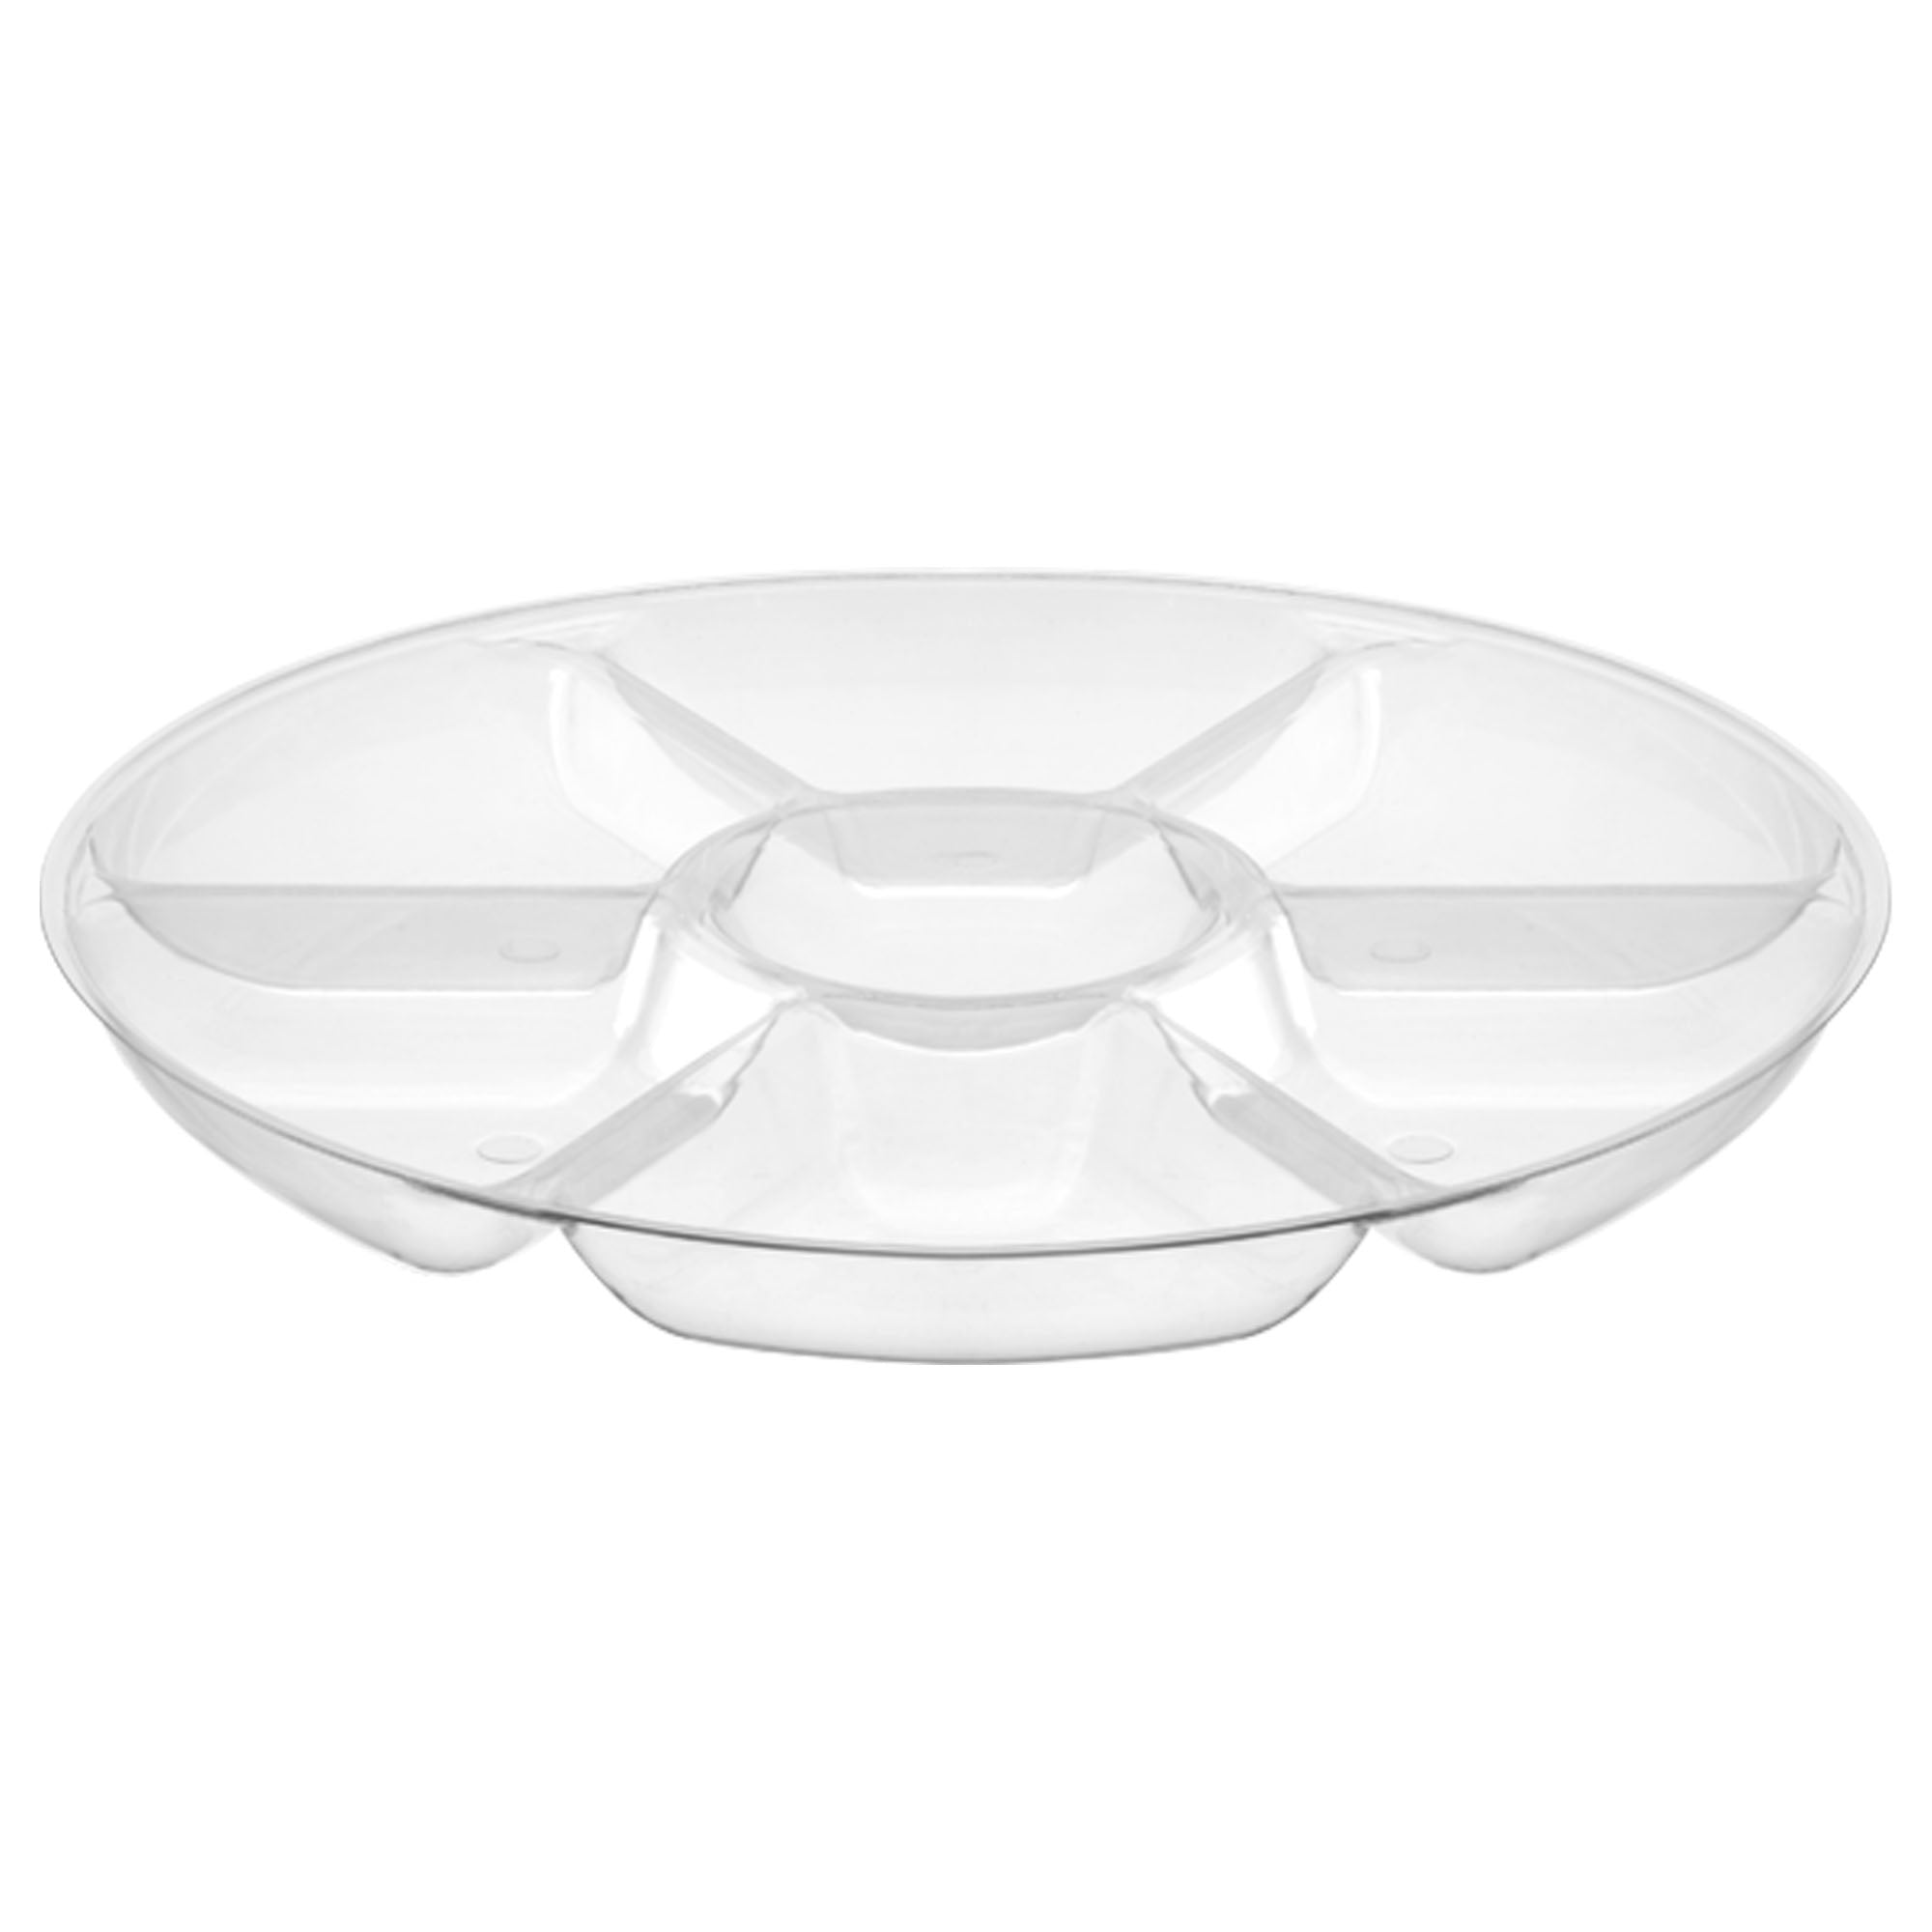 Premium Heavy Weight Plastic Compartment Platter<br/>Size Options: 12inch Compartment Tray, 14inch Compartment Tray, 16inch Compartment Tray and 16inch Compartment Lid